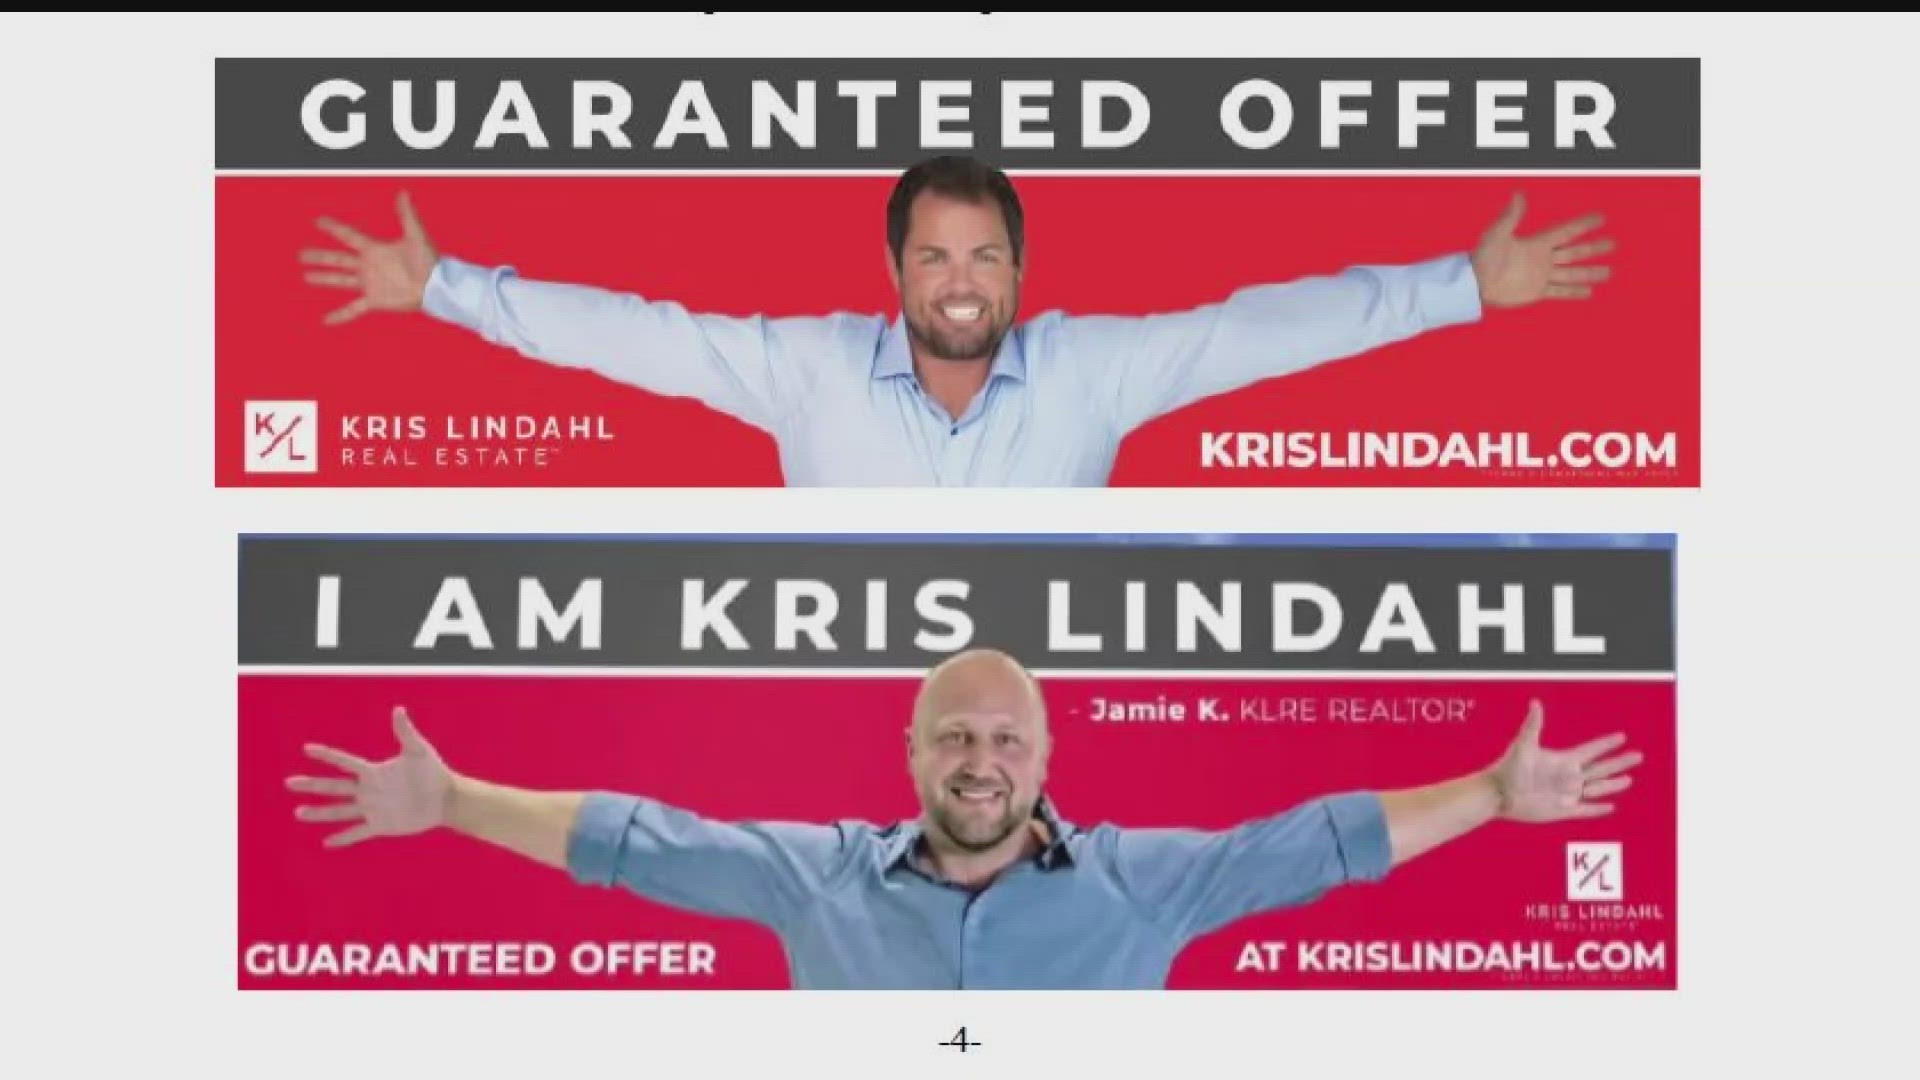 The real estate broker plans to re-file the case against a Canadian realtor who used a similar pose after attending Lindahl's seminar.